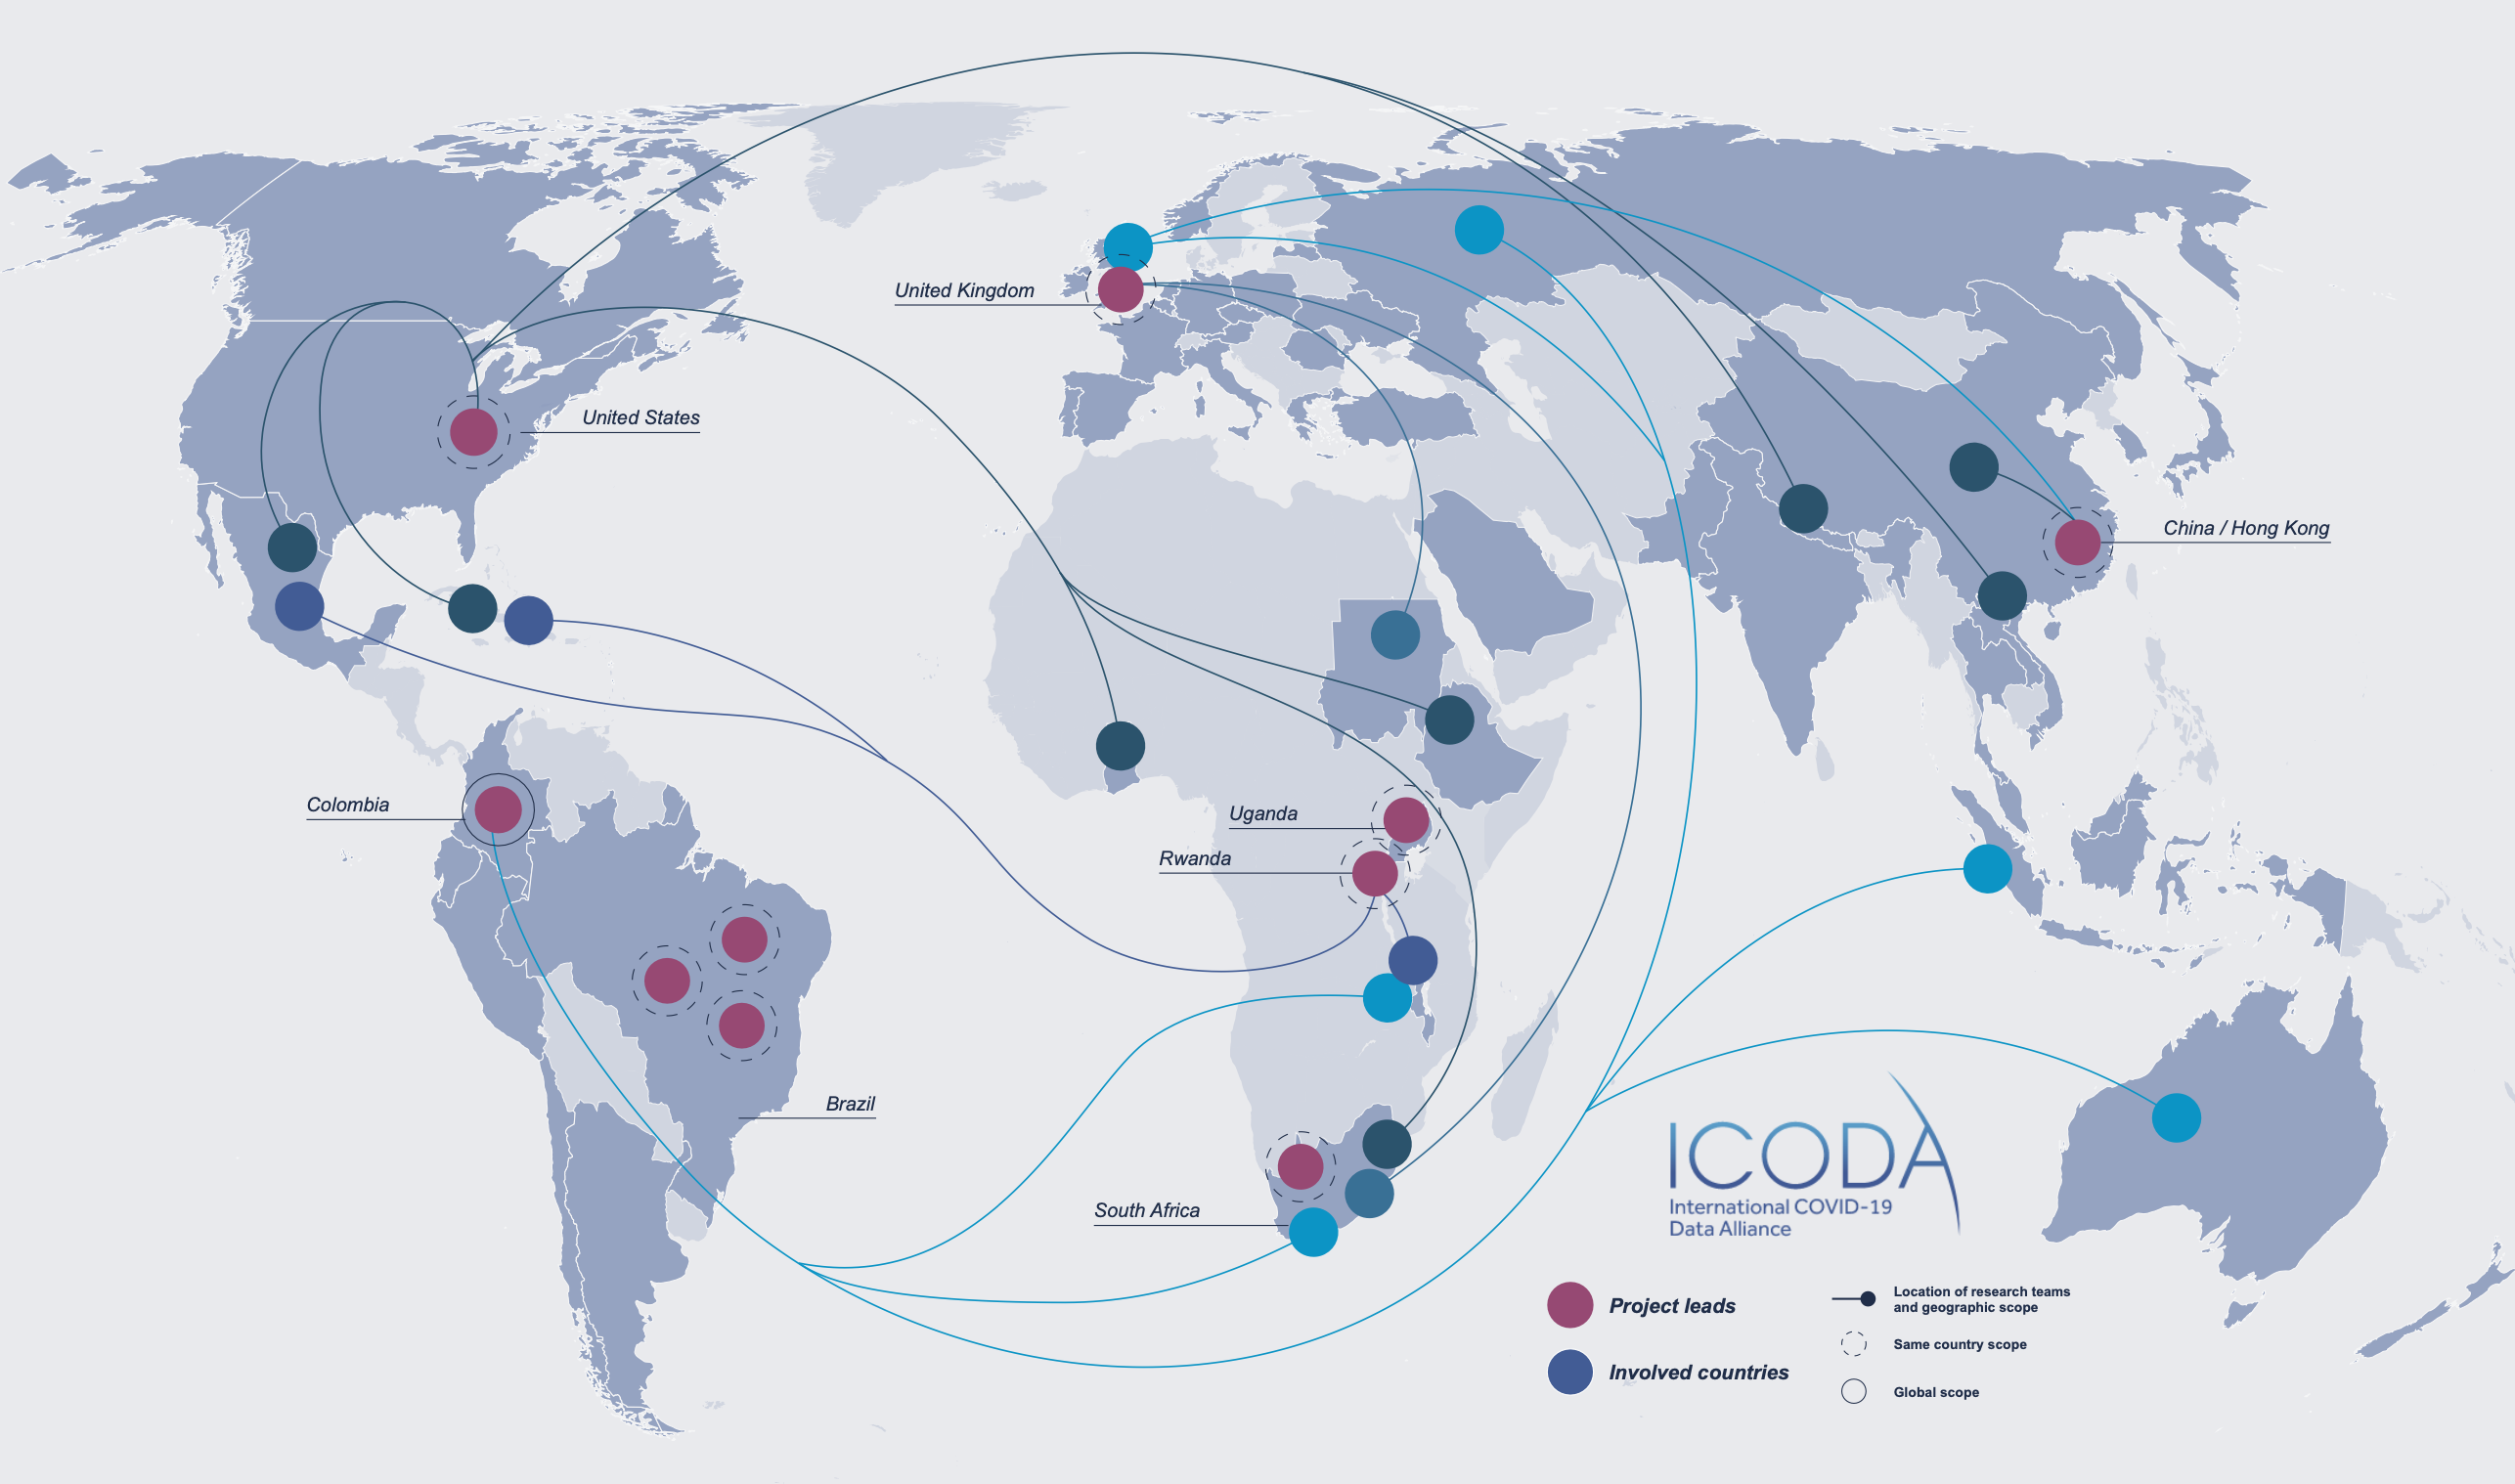 World map showing ICODA projects and connections